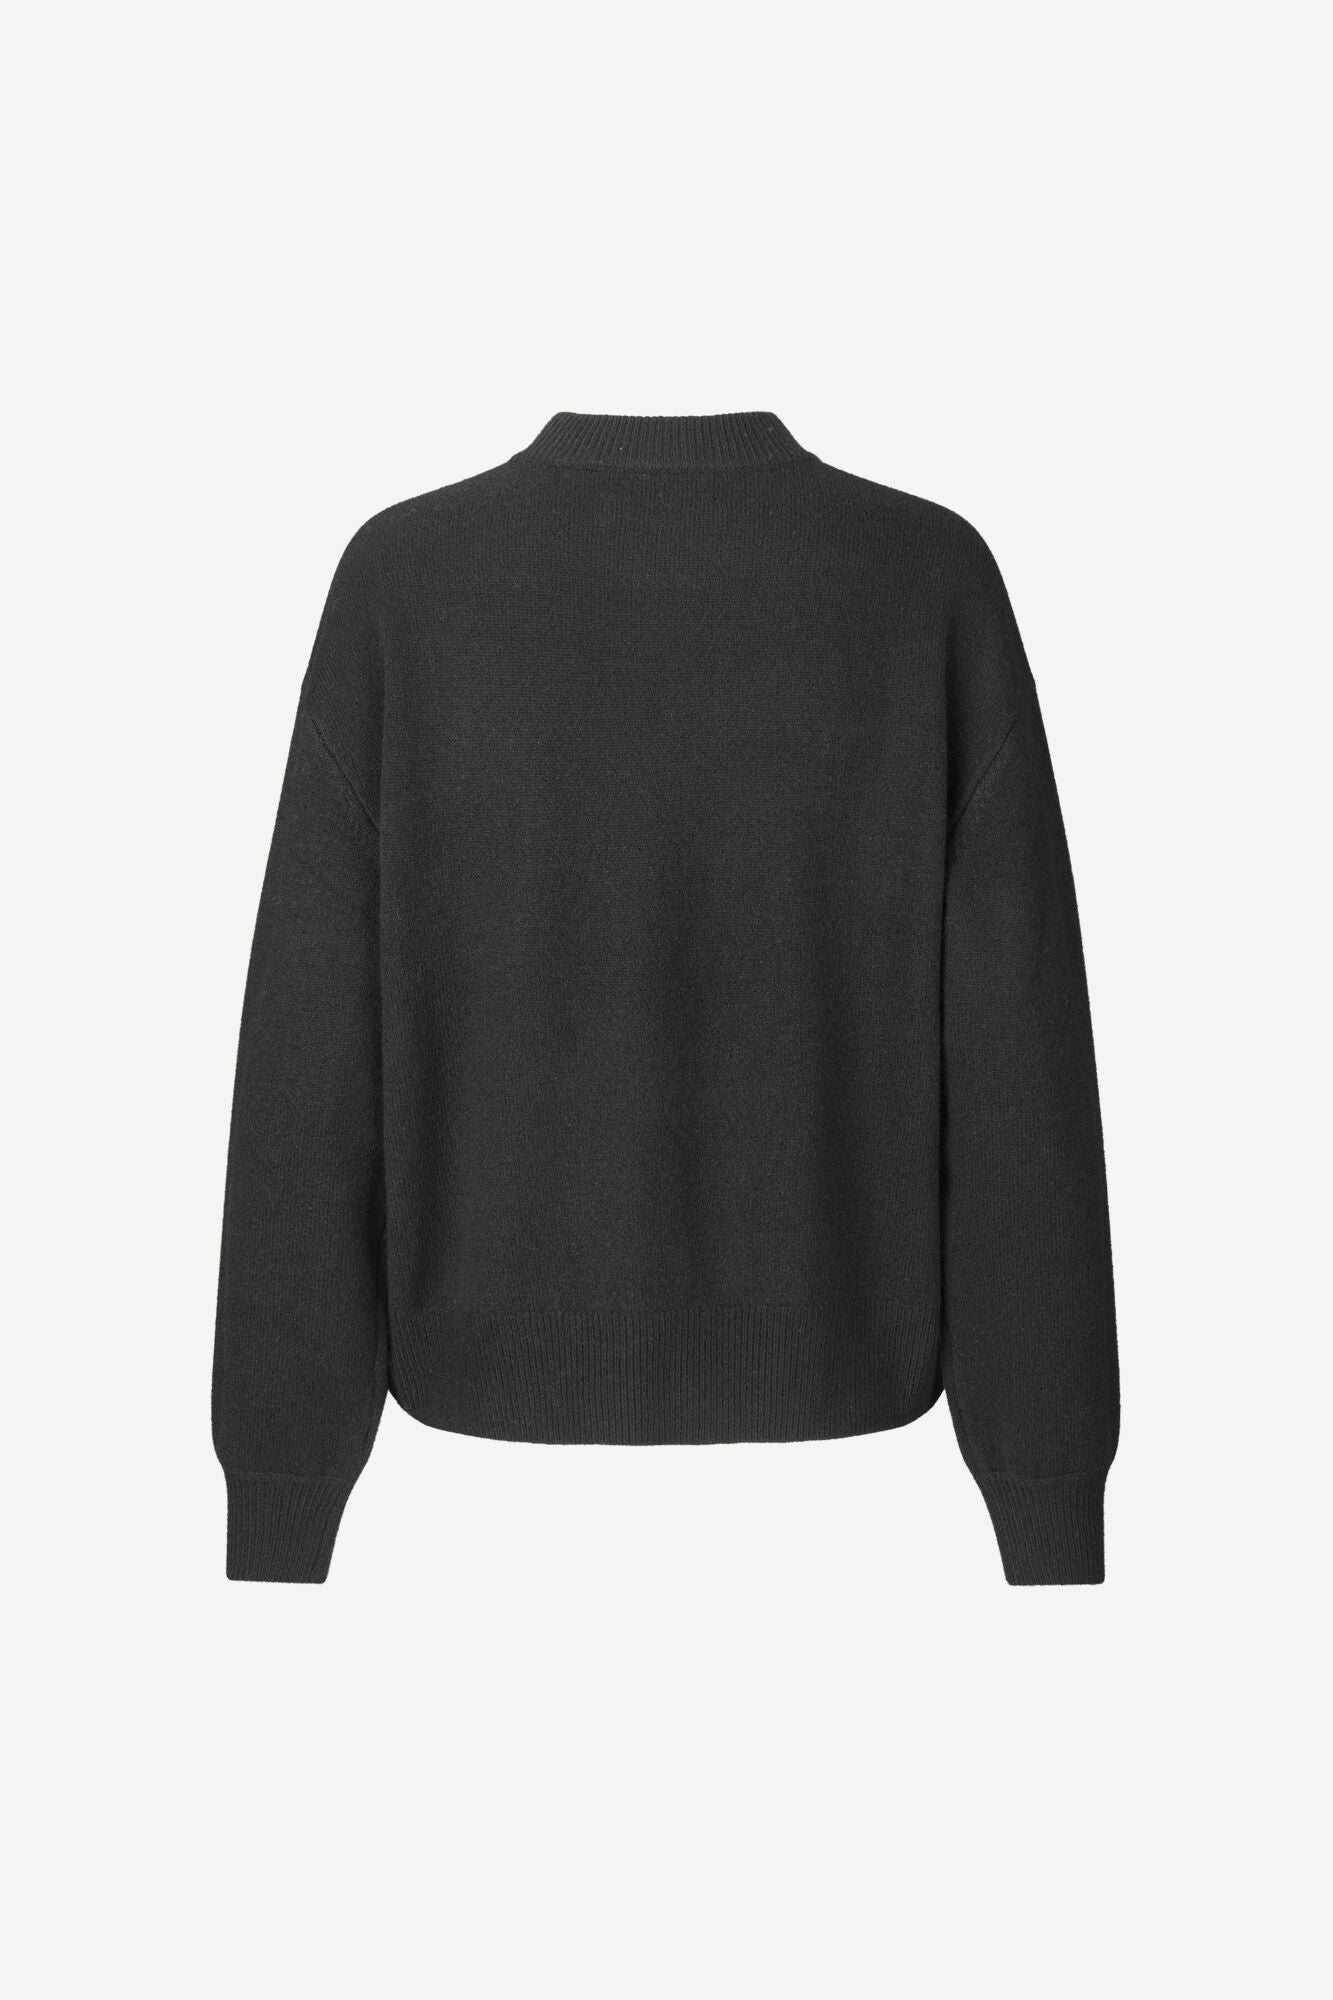 KNITTED CREW NECK SWEATER IN BLACK BLUE